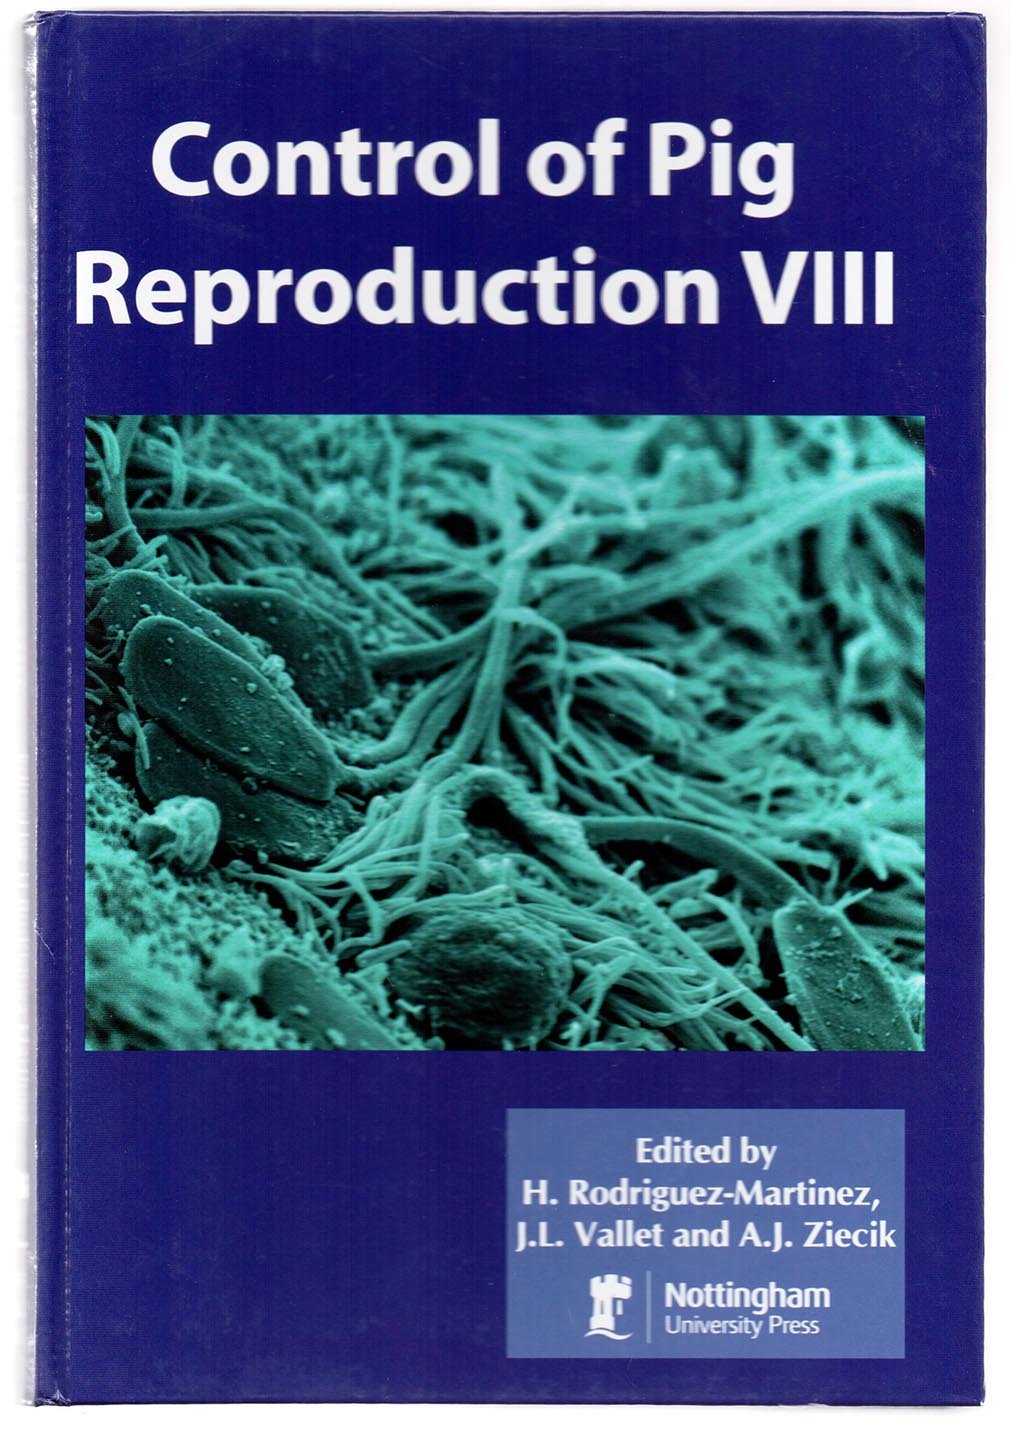 Control of Pig Reproduction VIII